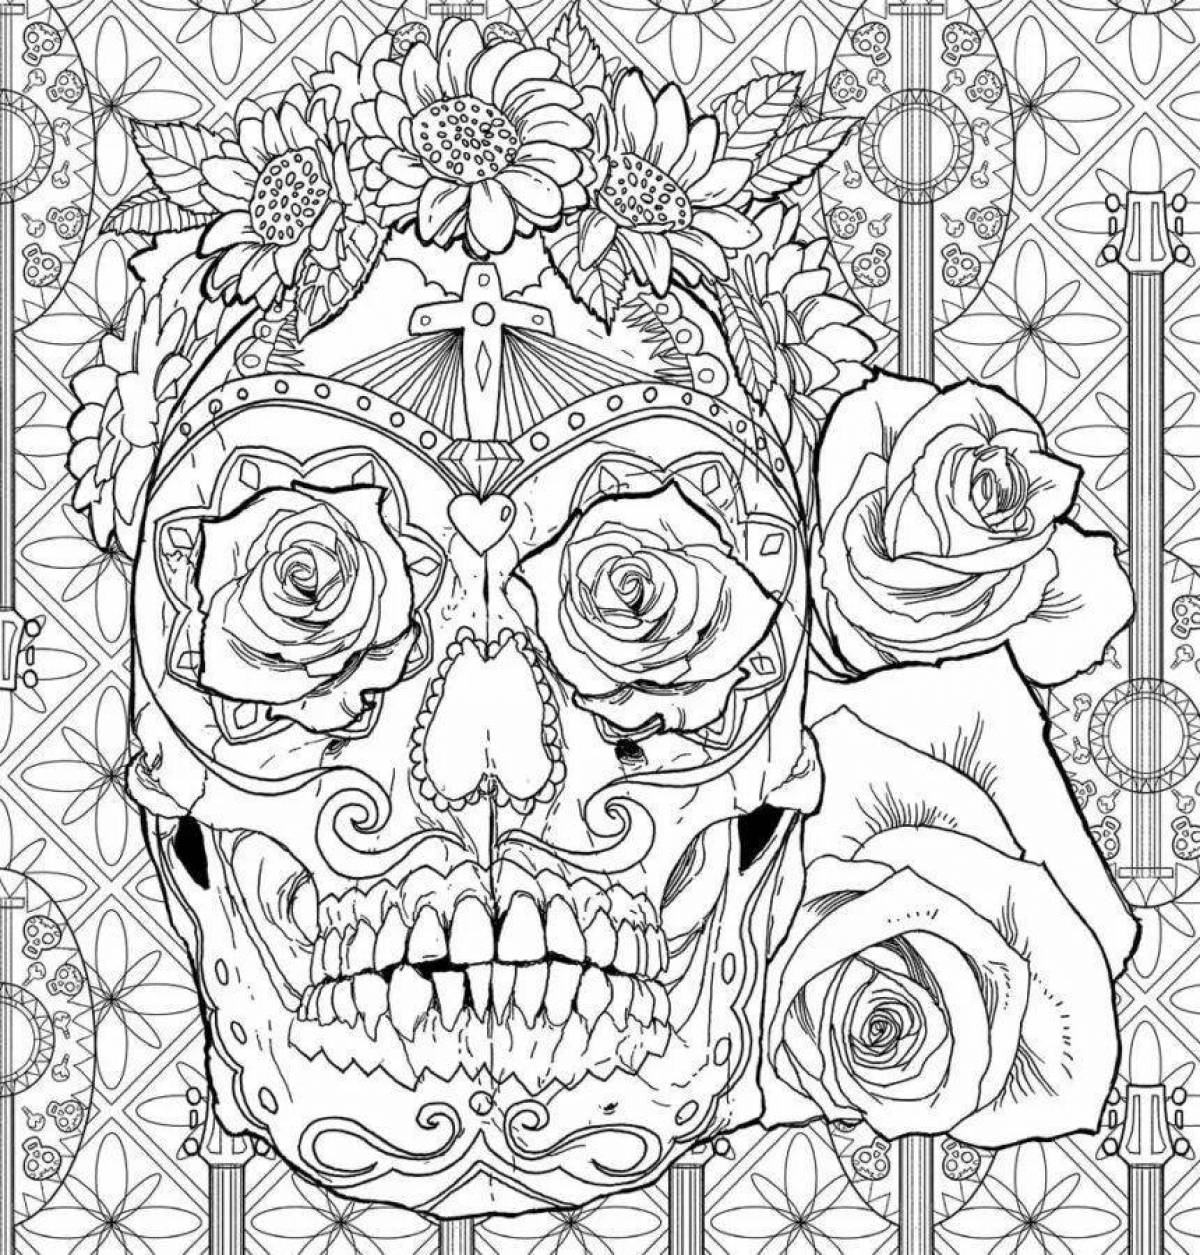 Frightening horror coloring book